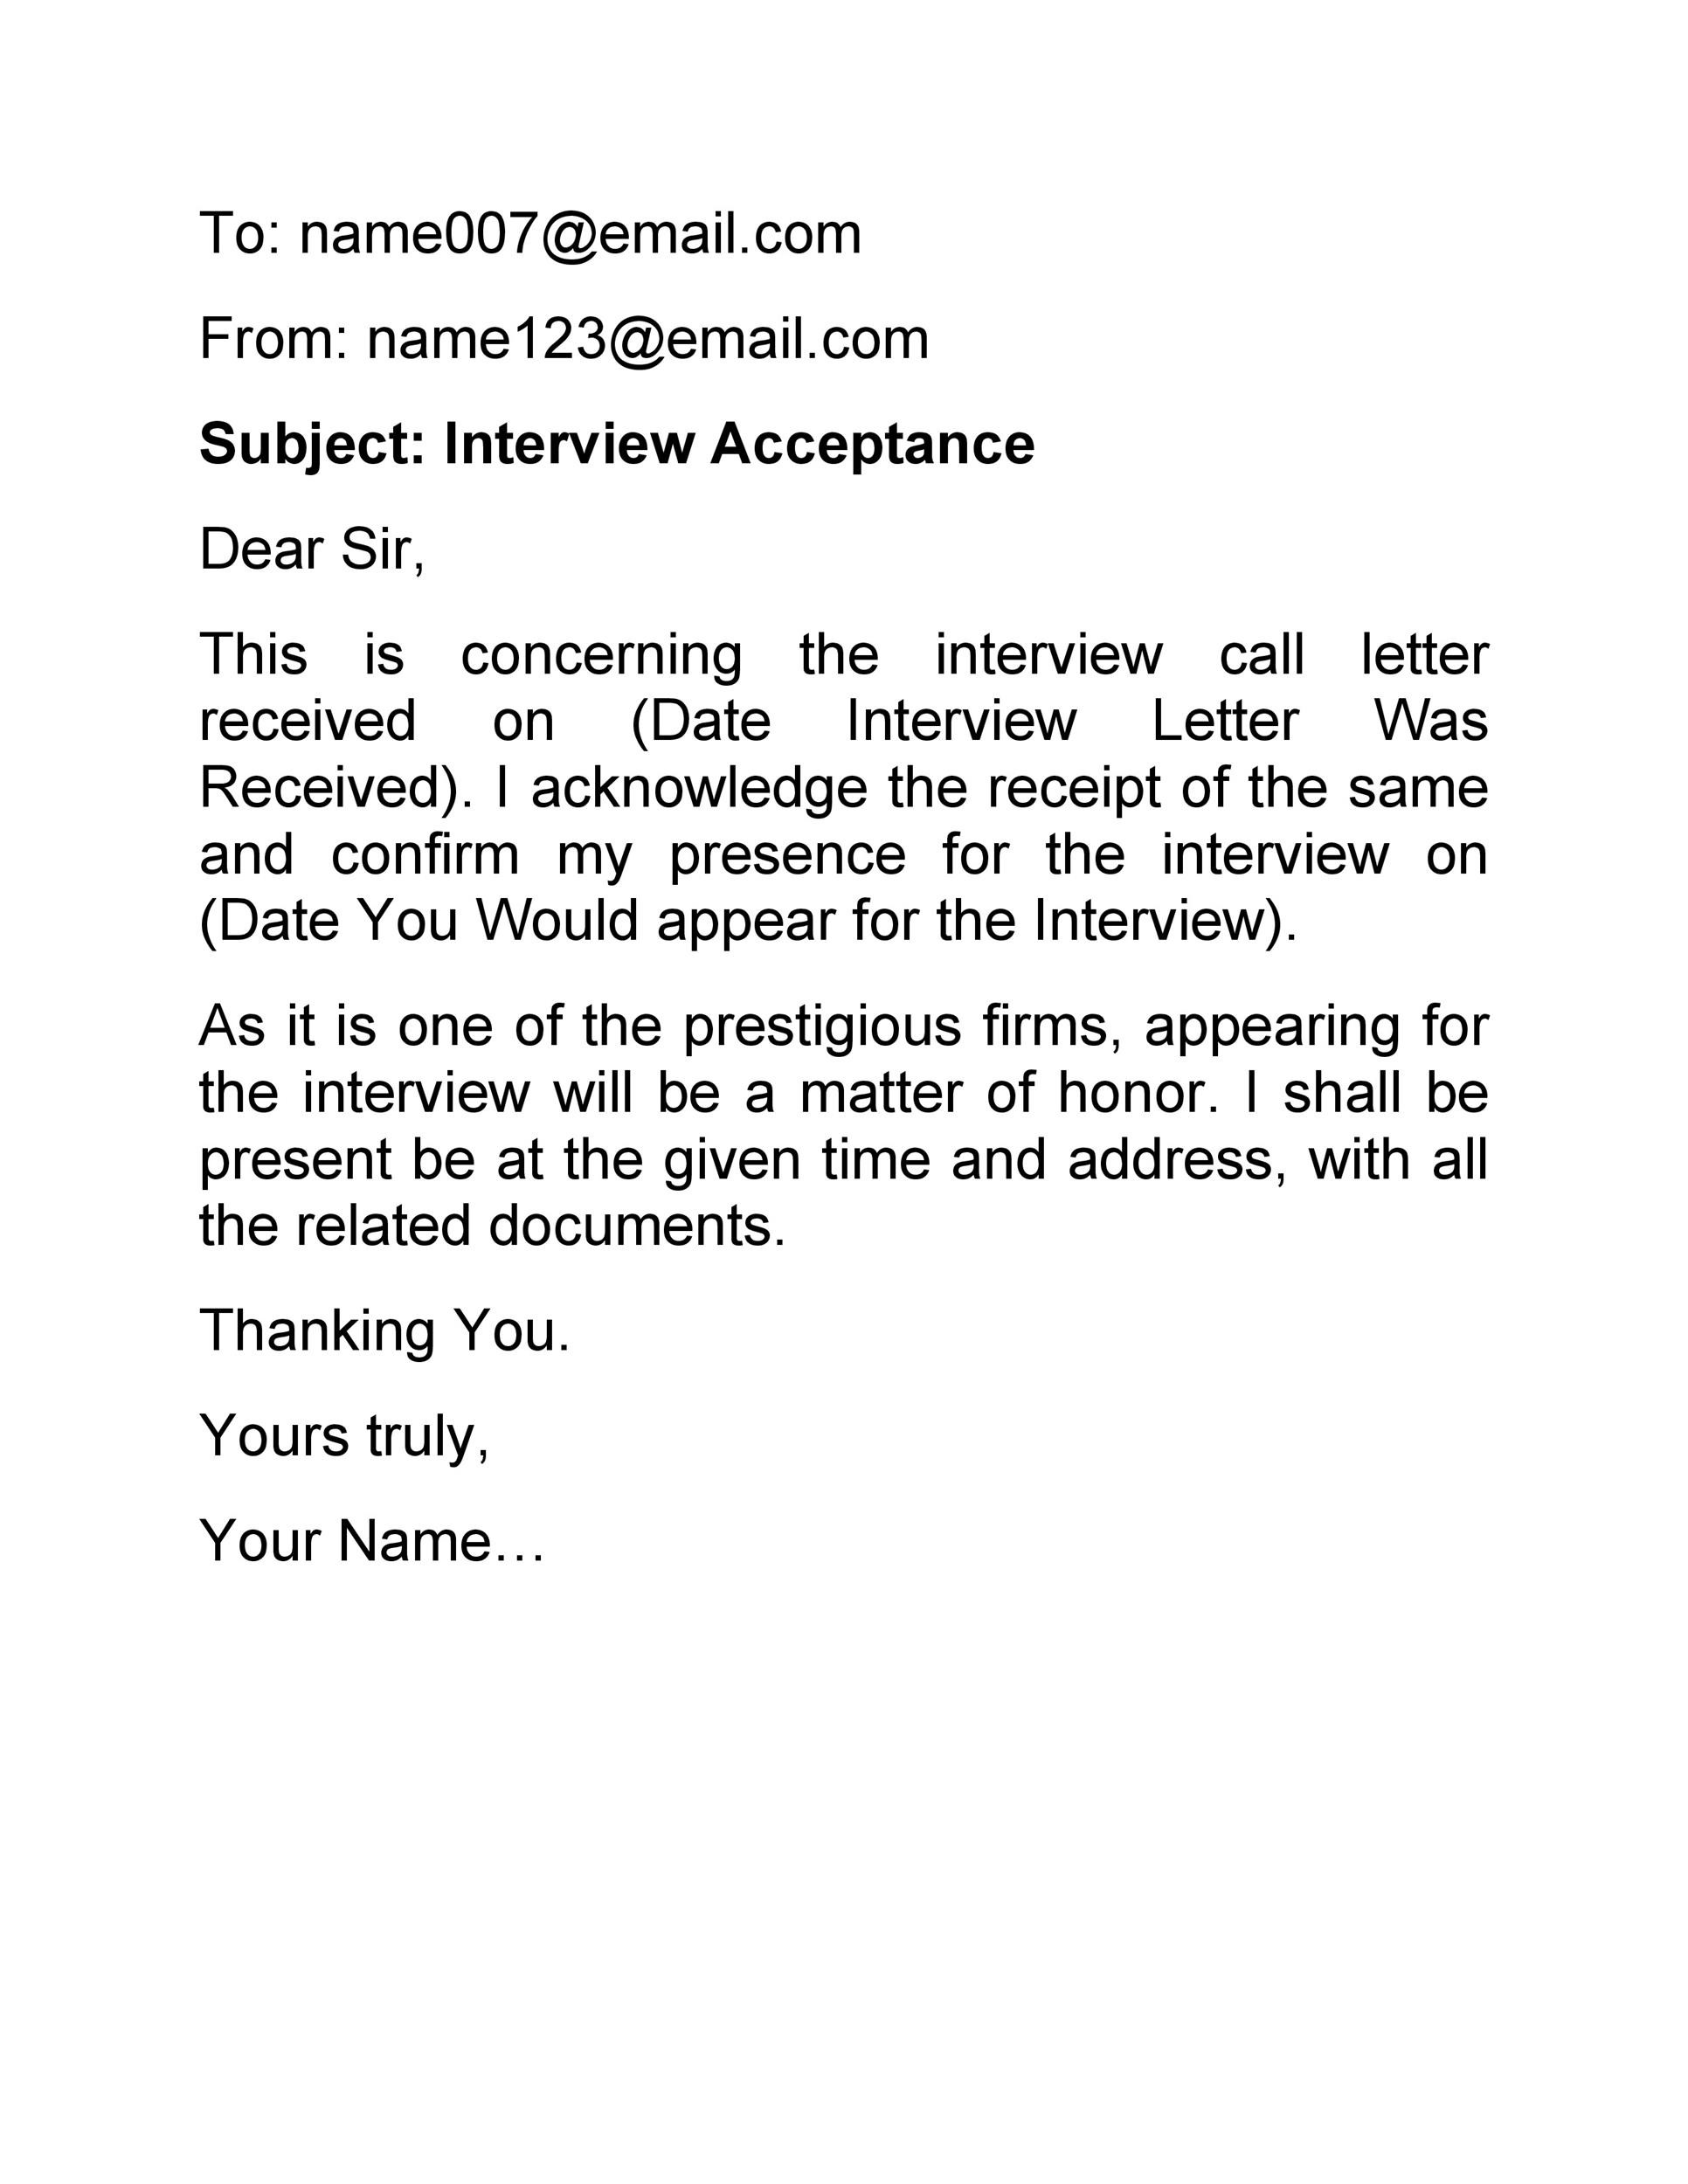 case study interview email